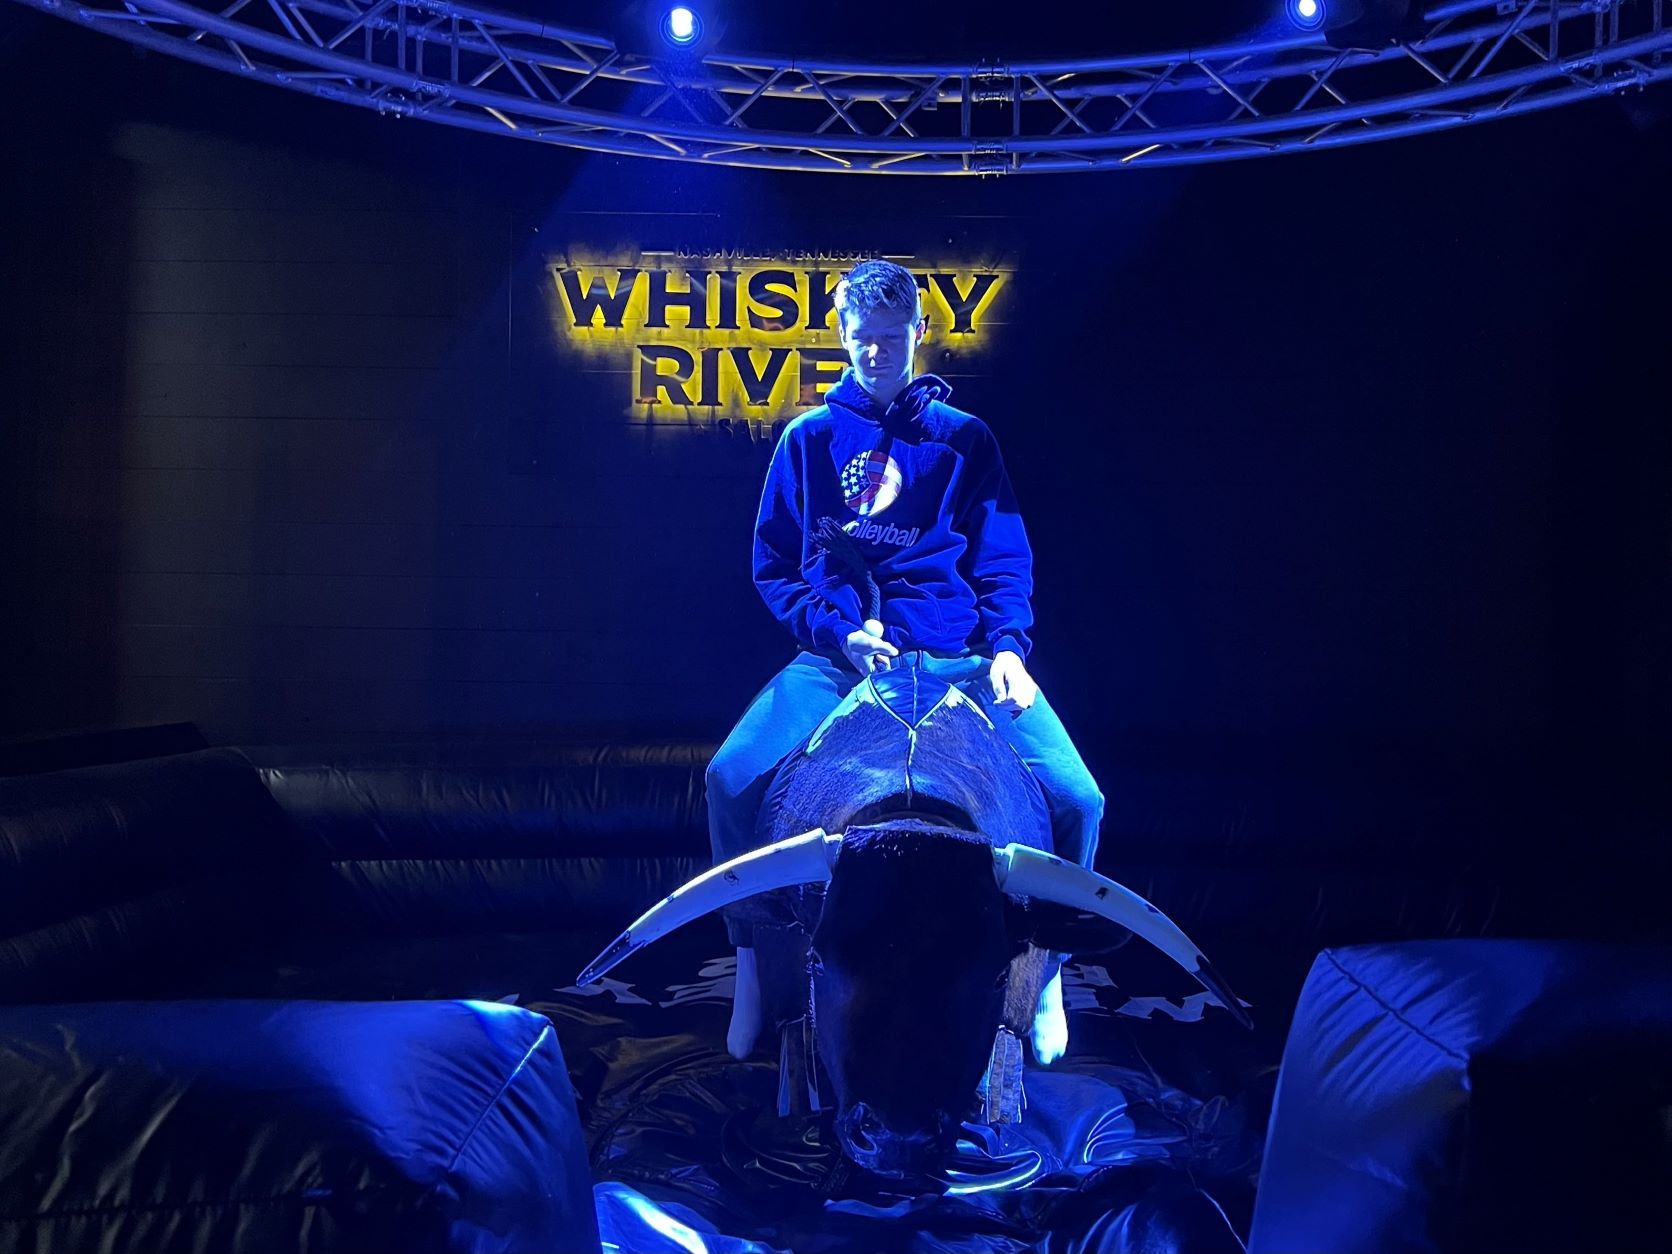 A teen rides a mechanical bull at Whiskey River in Nashville, Tennessee.